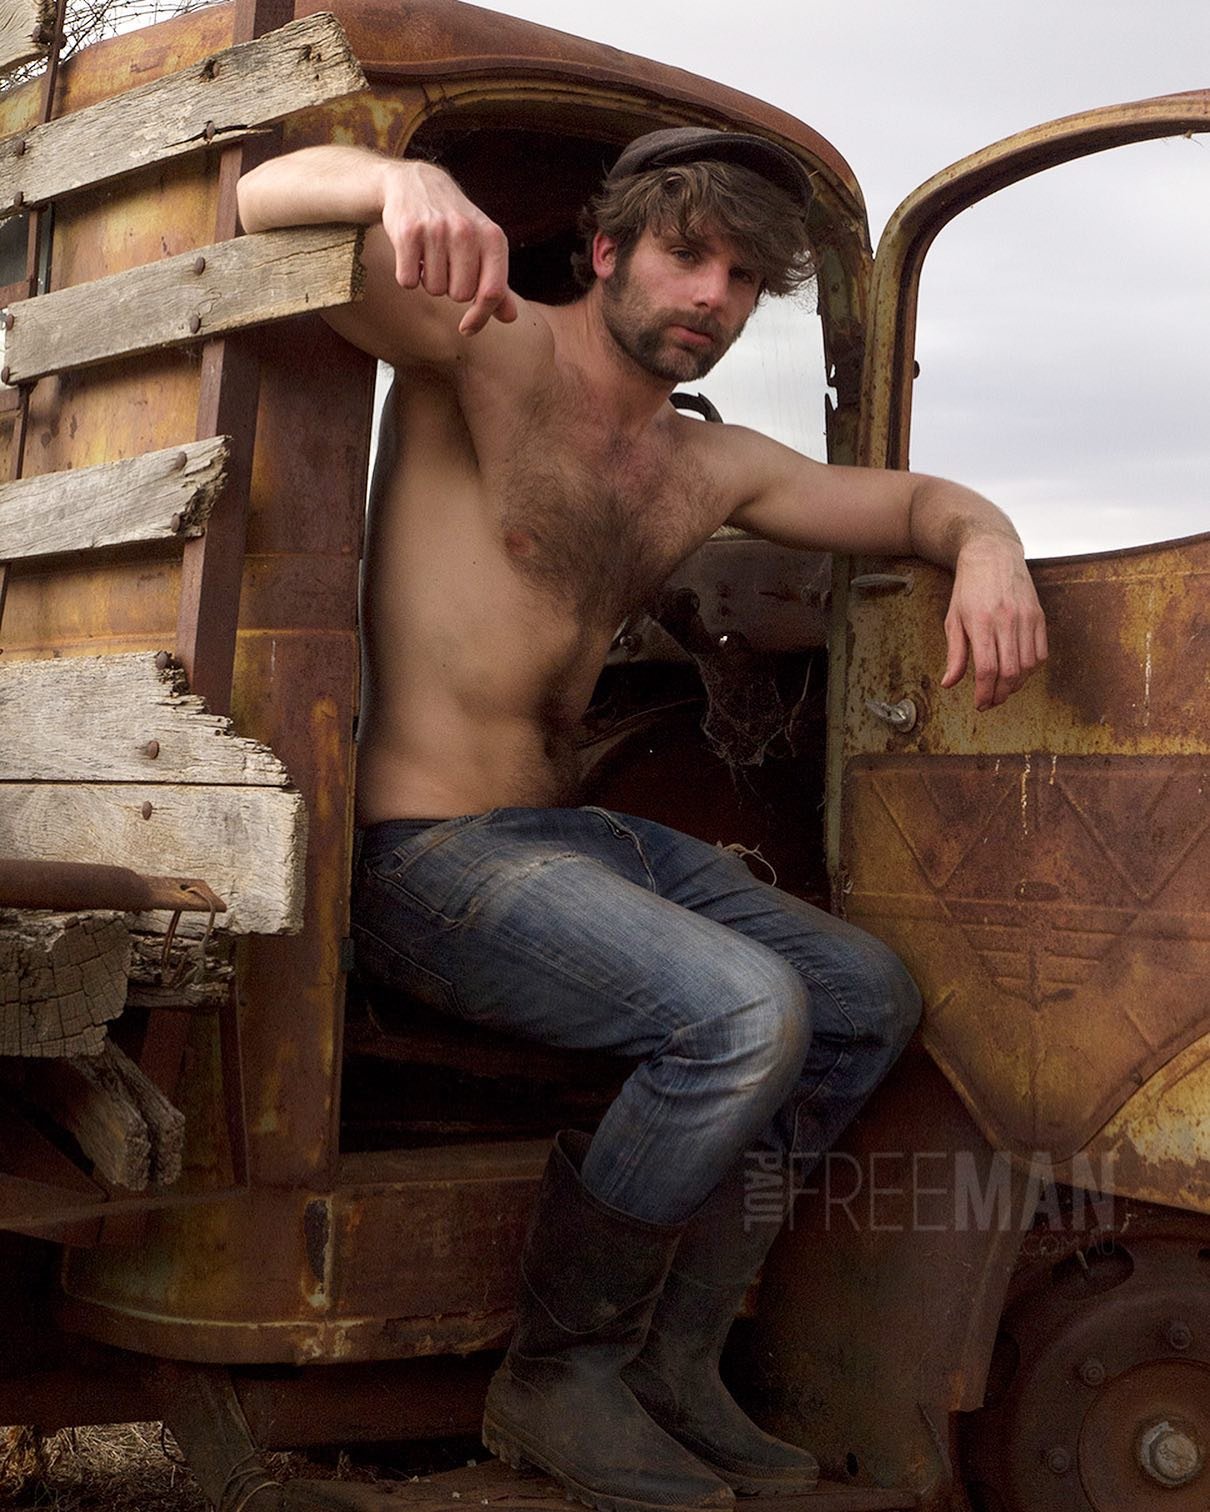 I love the evocative textures of an old truck! 
A hitherto unpublished portrait of Seth from a shoot for my book Larrikin Yakka 
@seth_r_dale